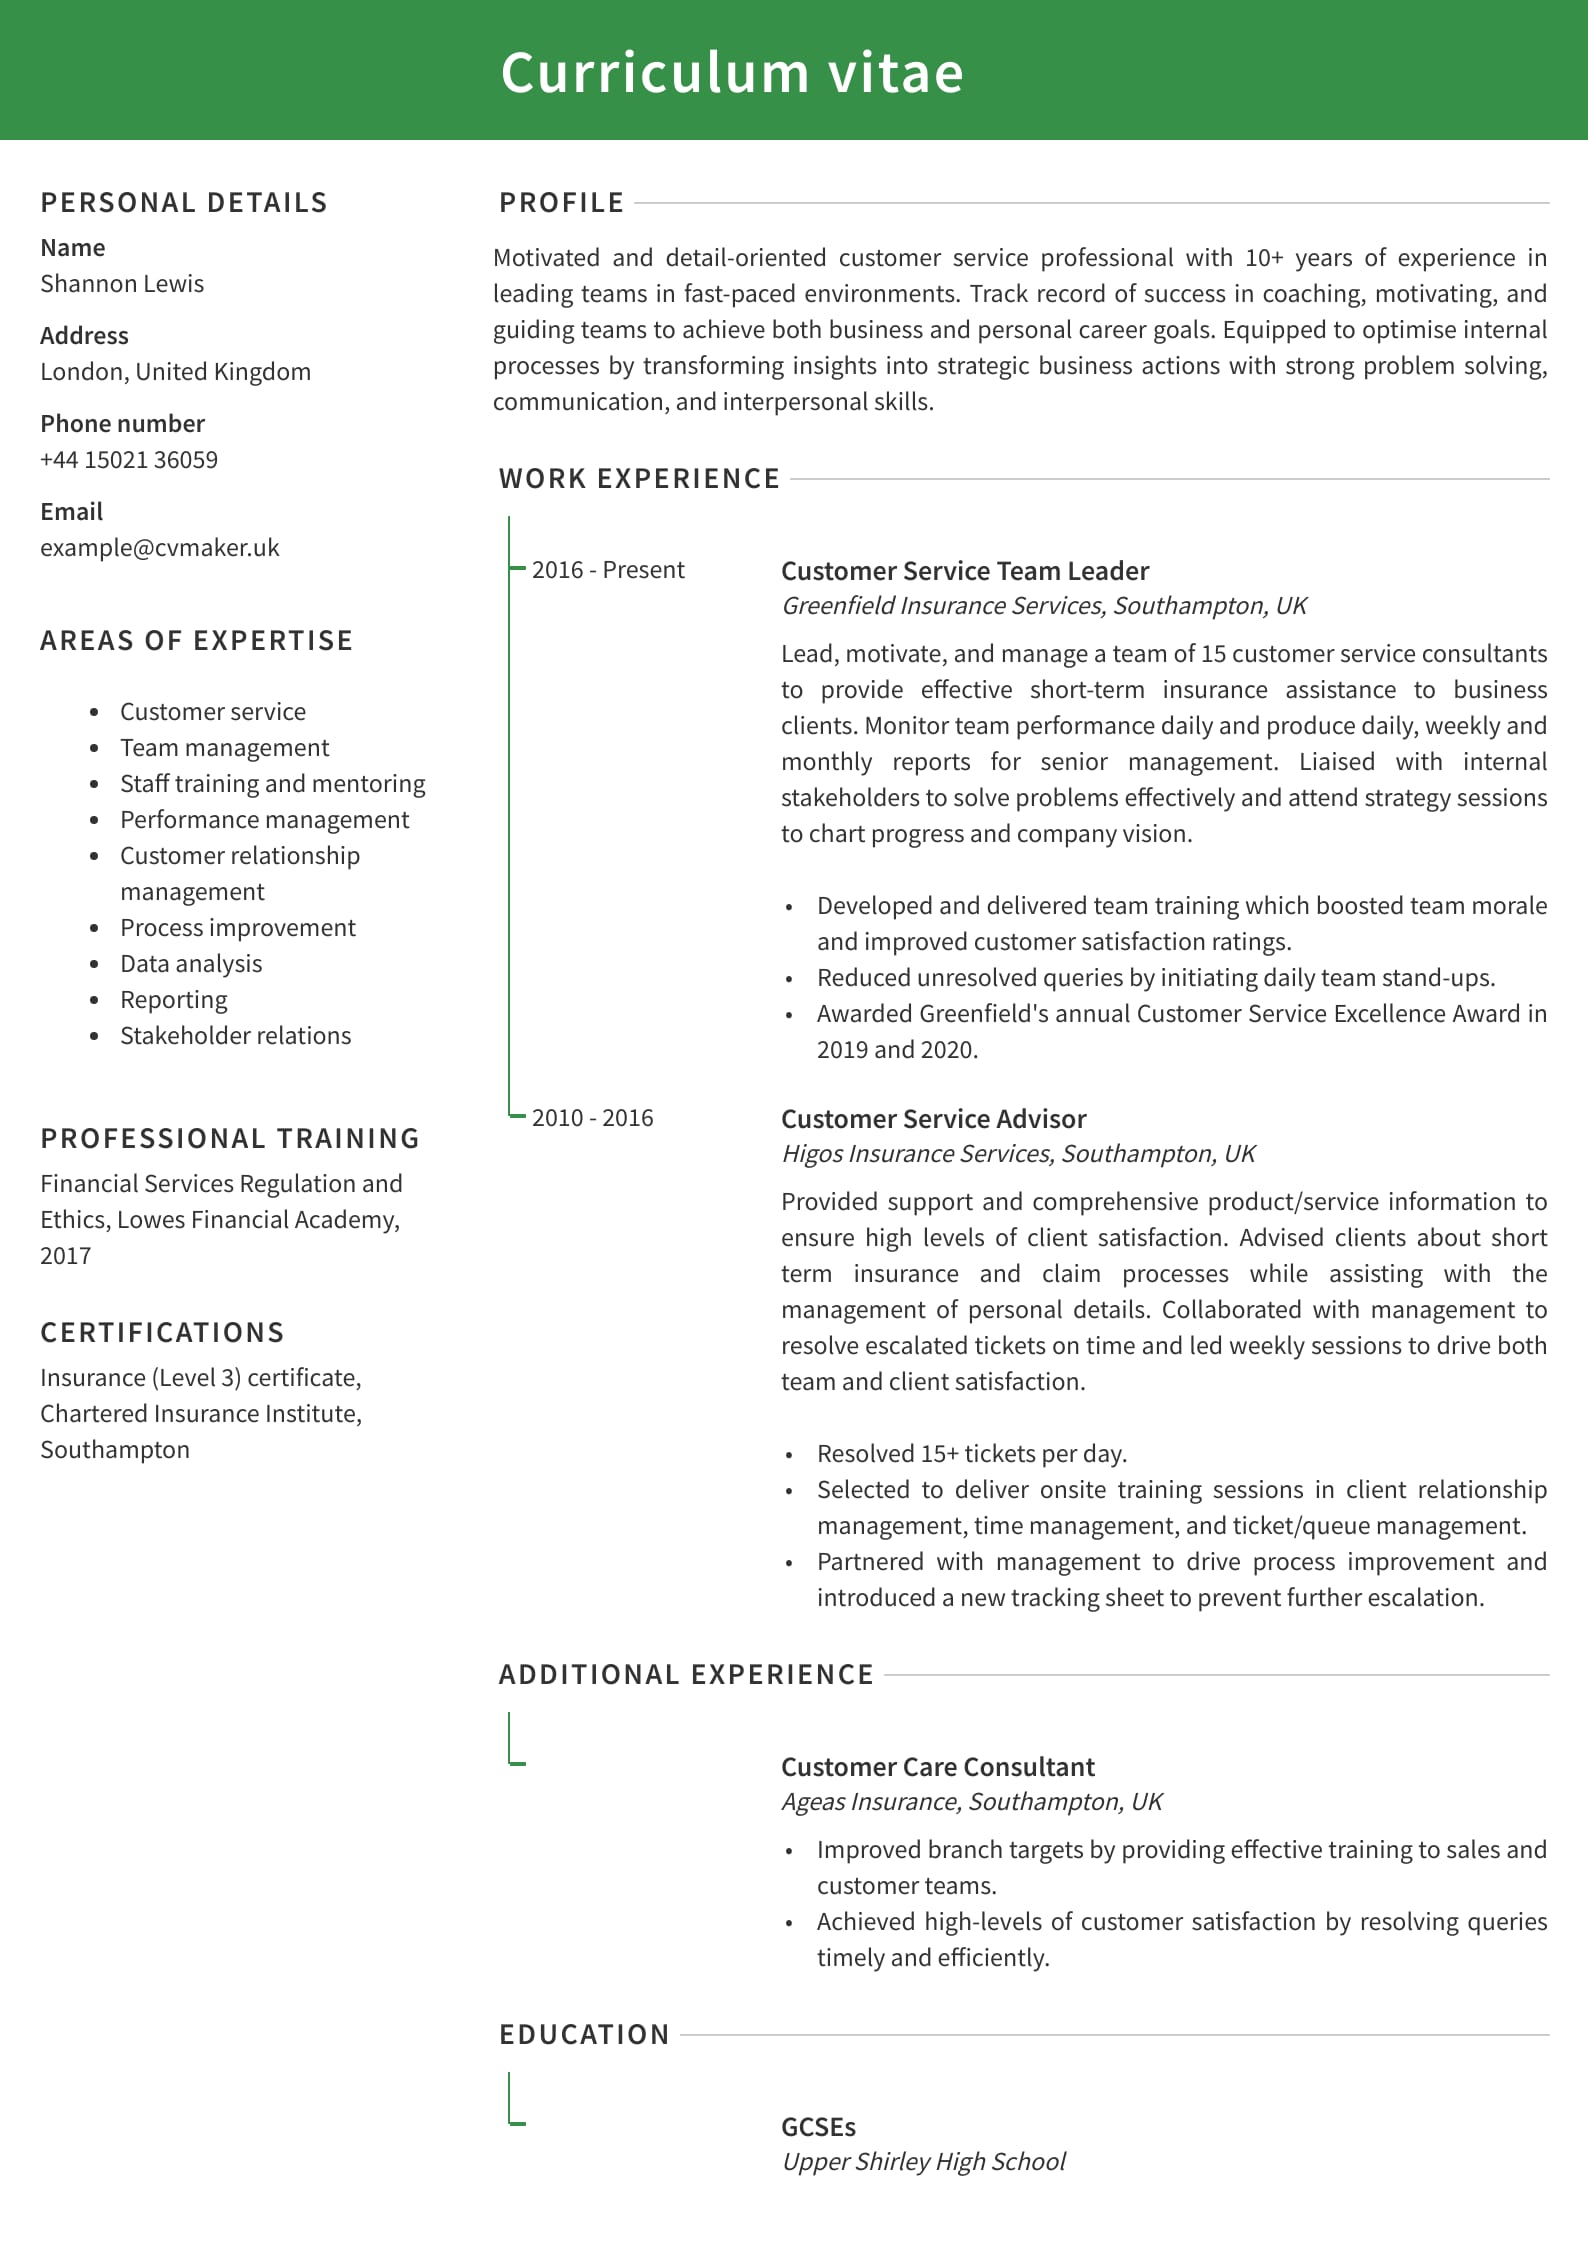 Customer Service CV - Best CV guide with tips and examples